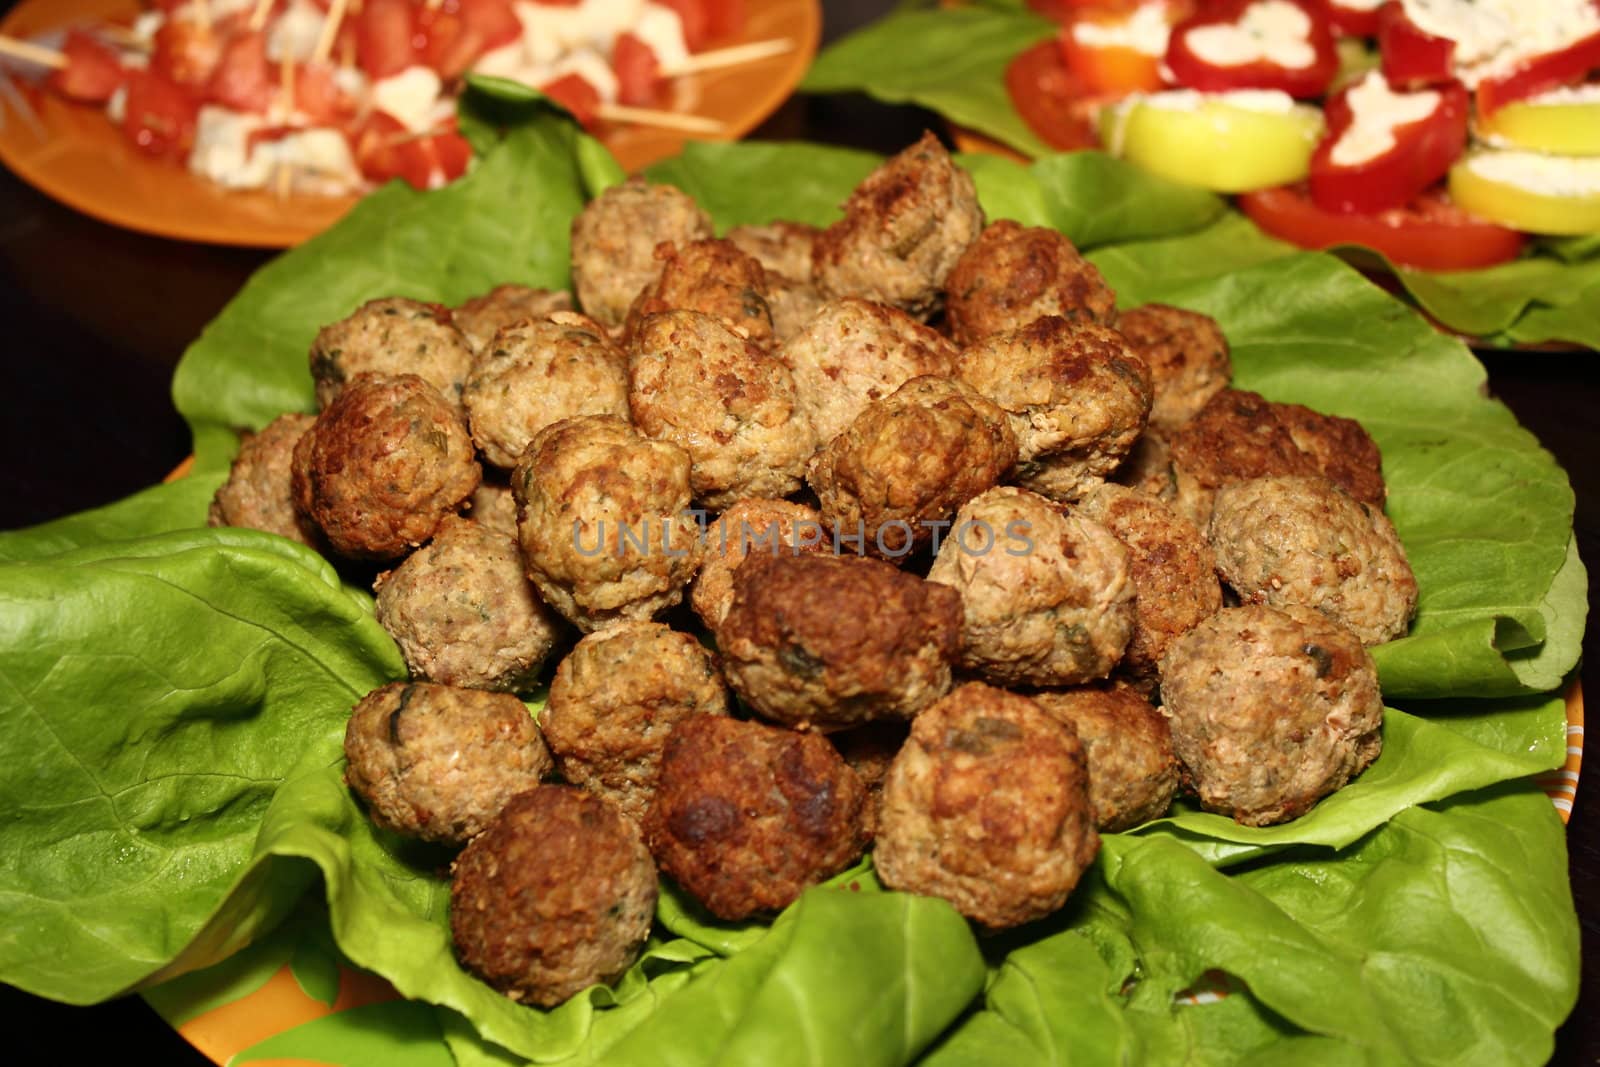 meatballs and green salad set on a plate